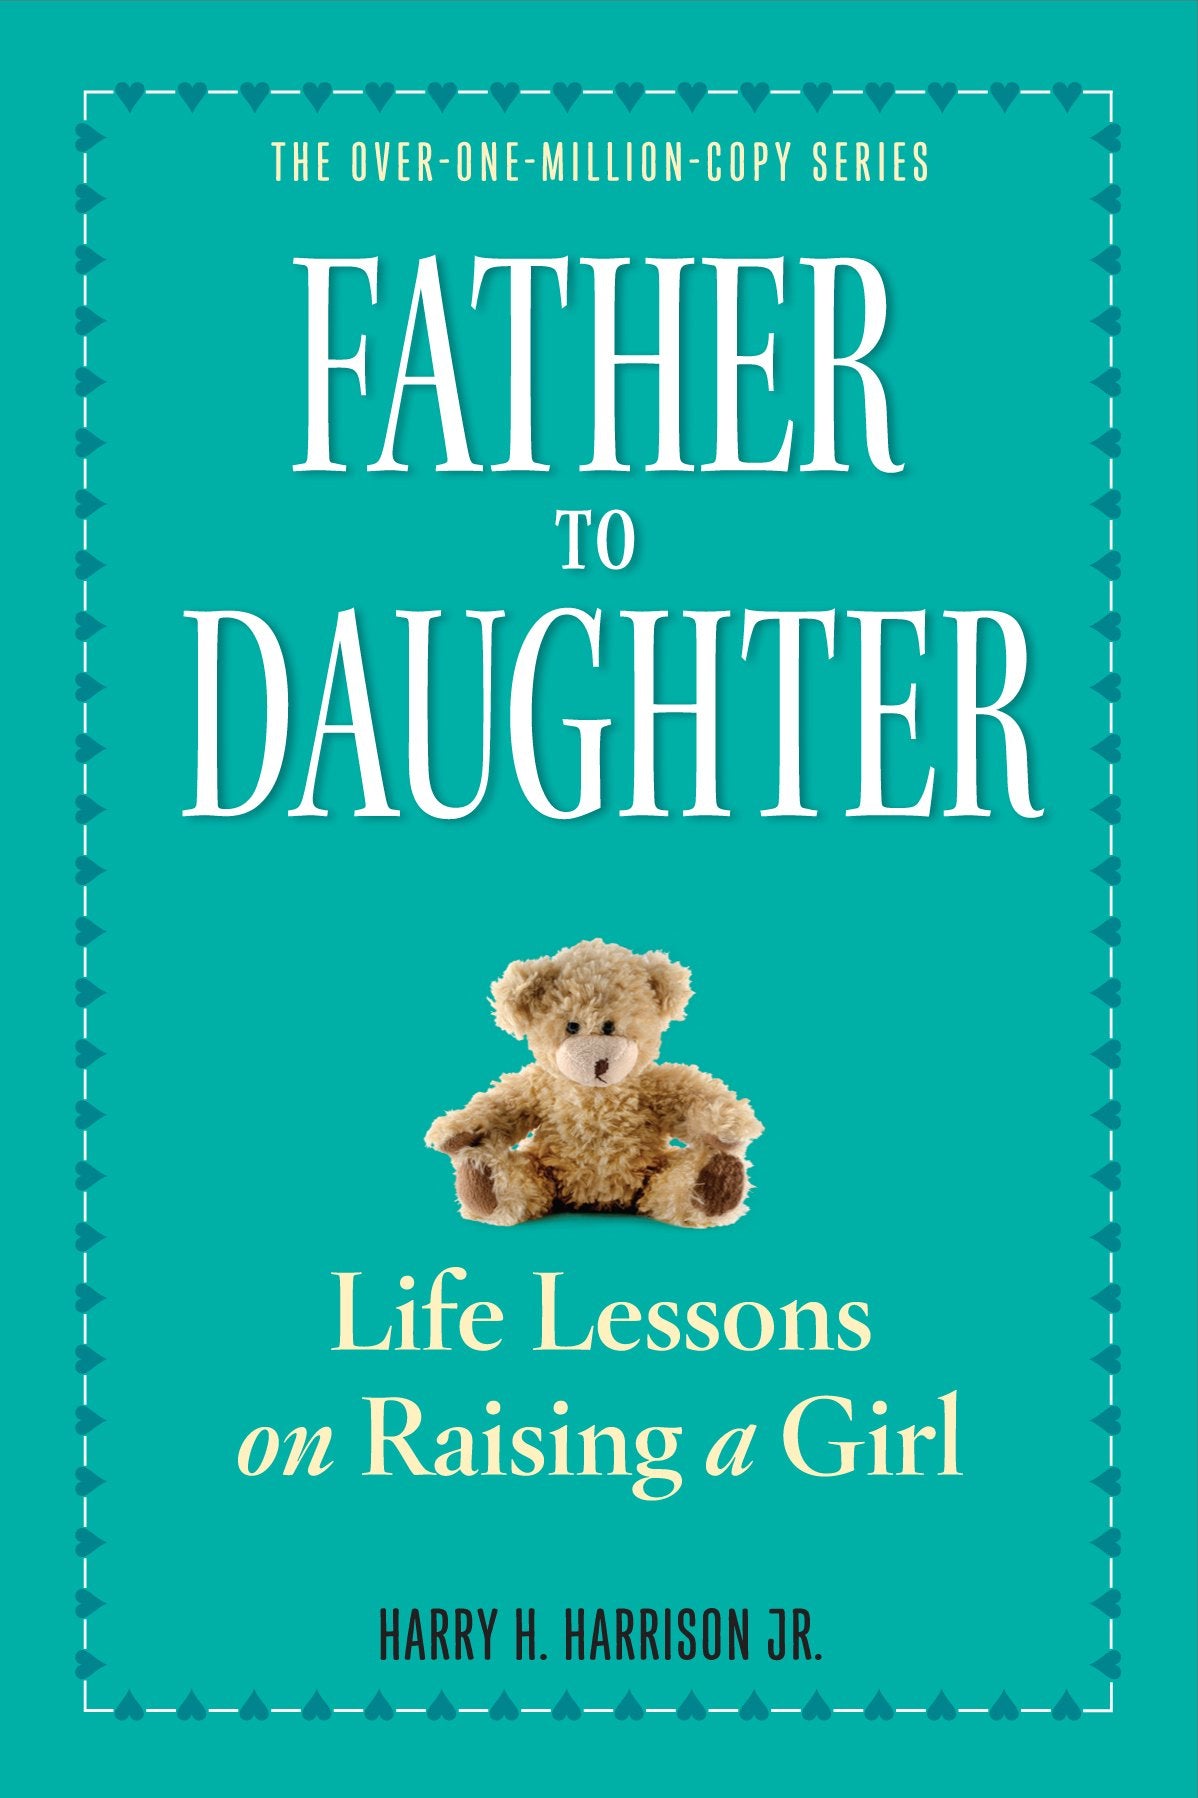 Father to Daughter: Life Lessons on Raising a Girl by Harrison Jr, Harry H.